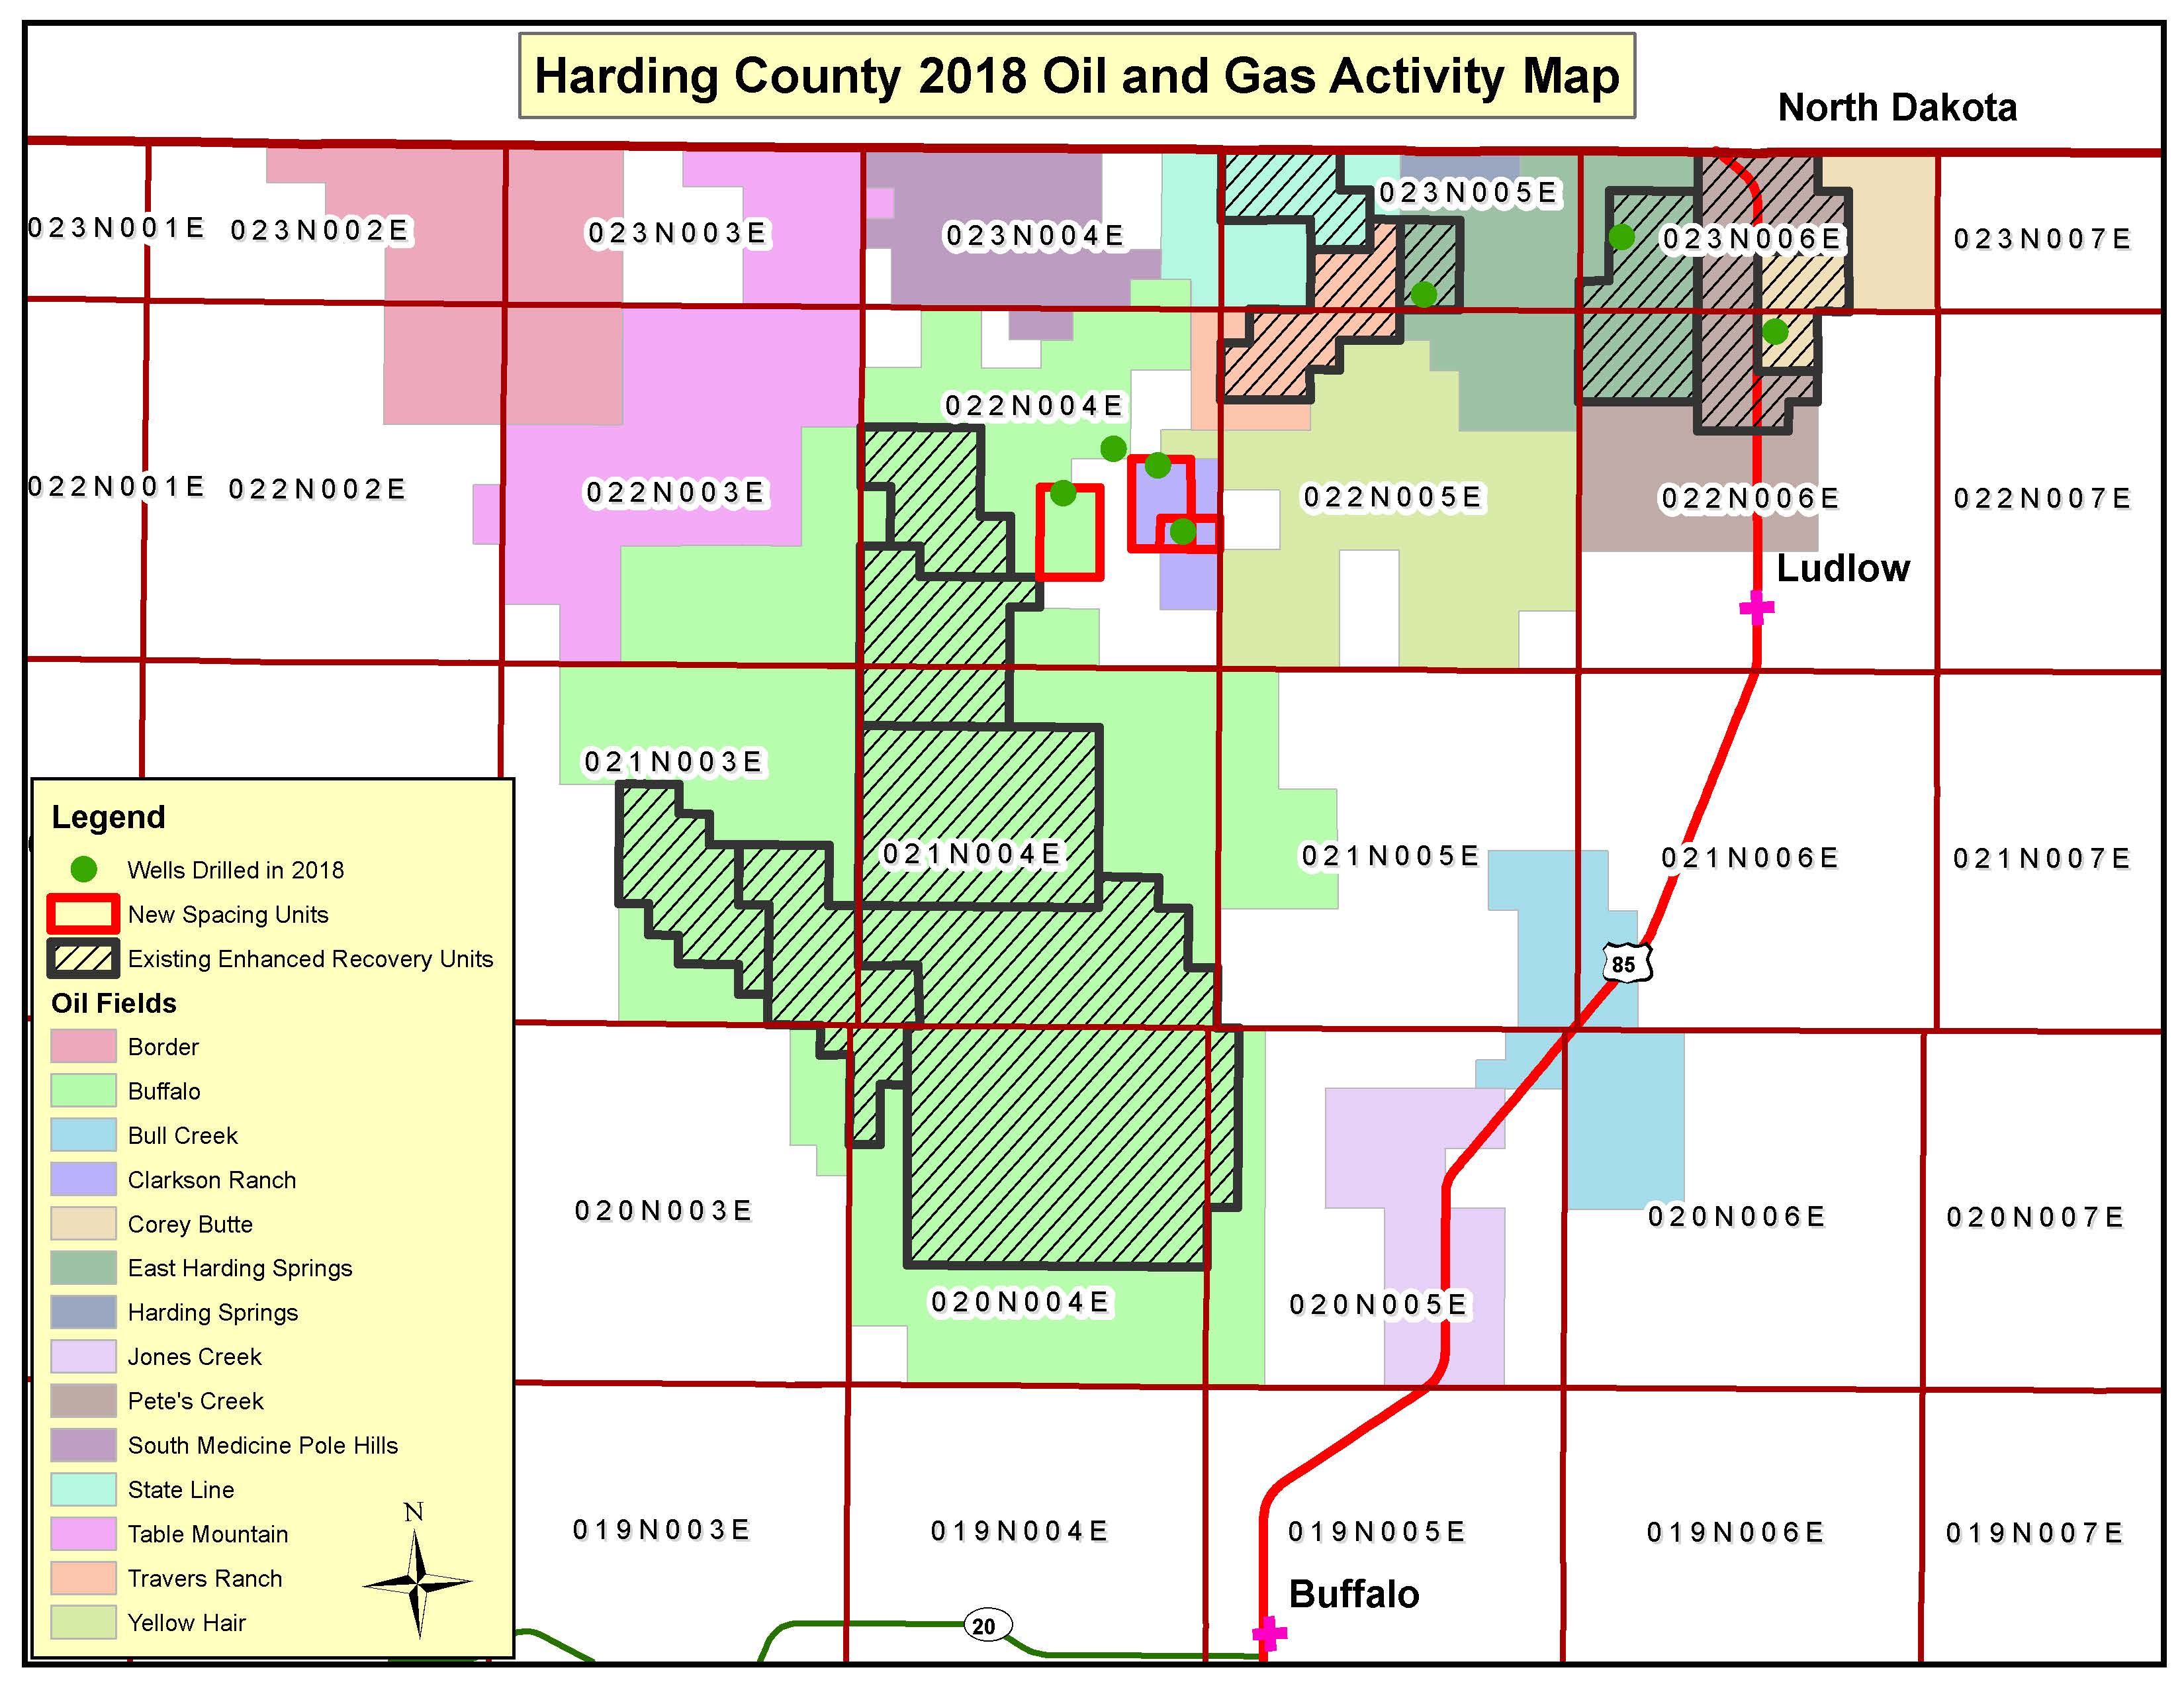 Harding County 2018 Oil & Gas Activity Map